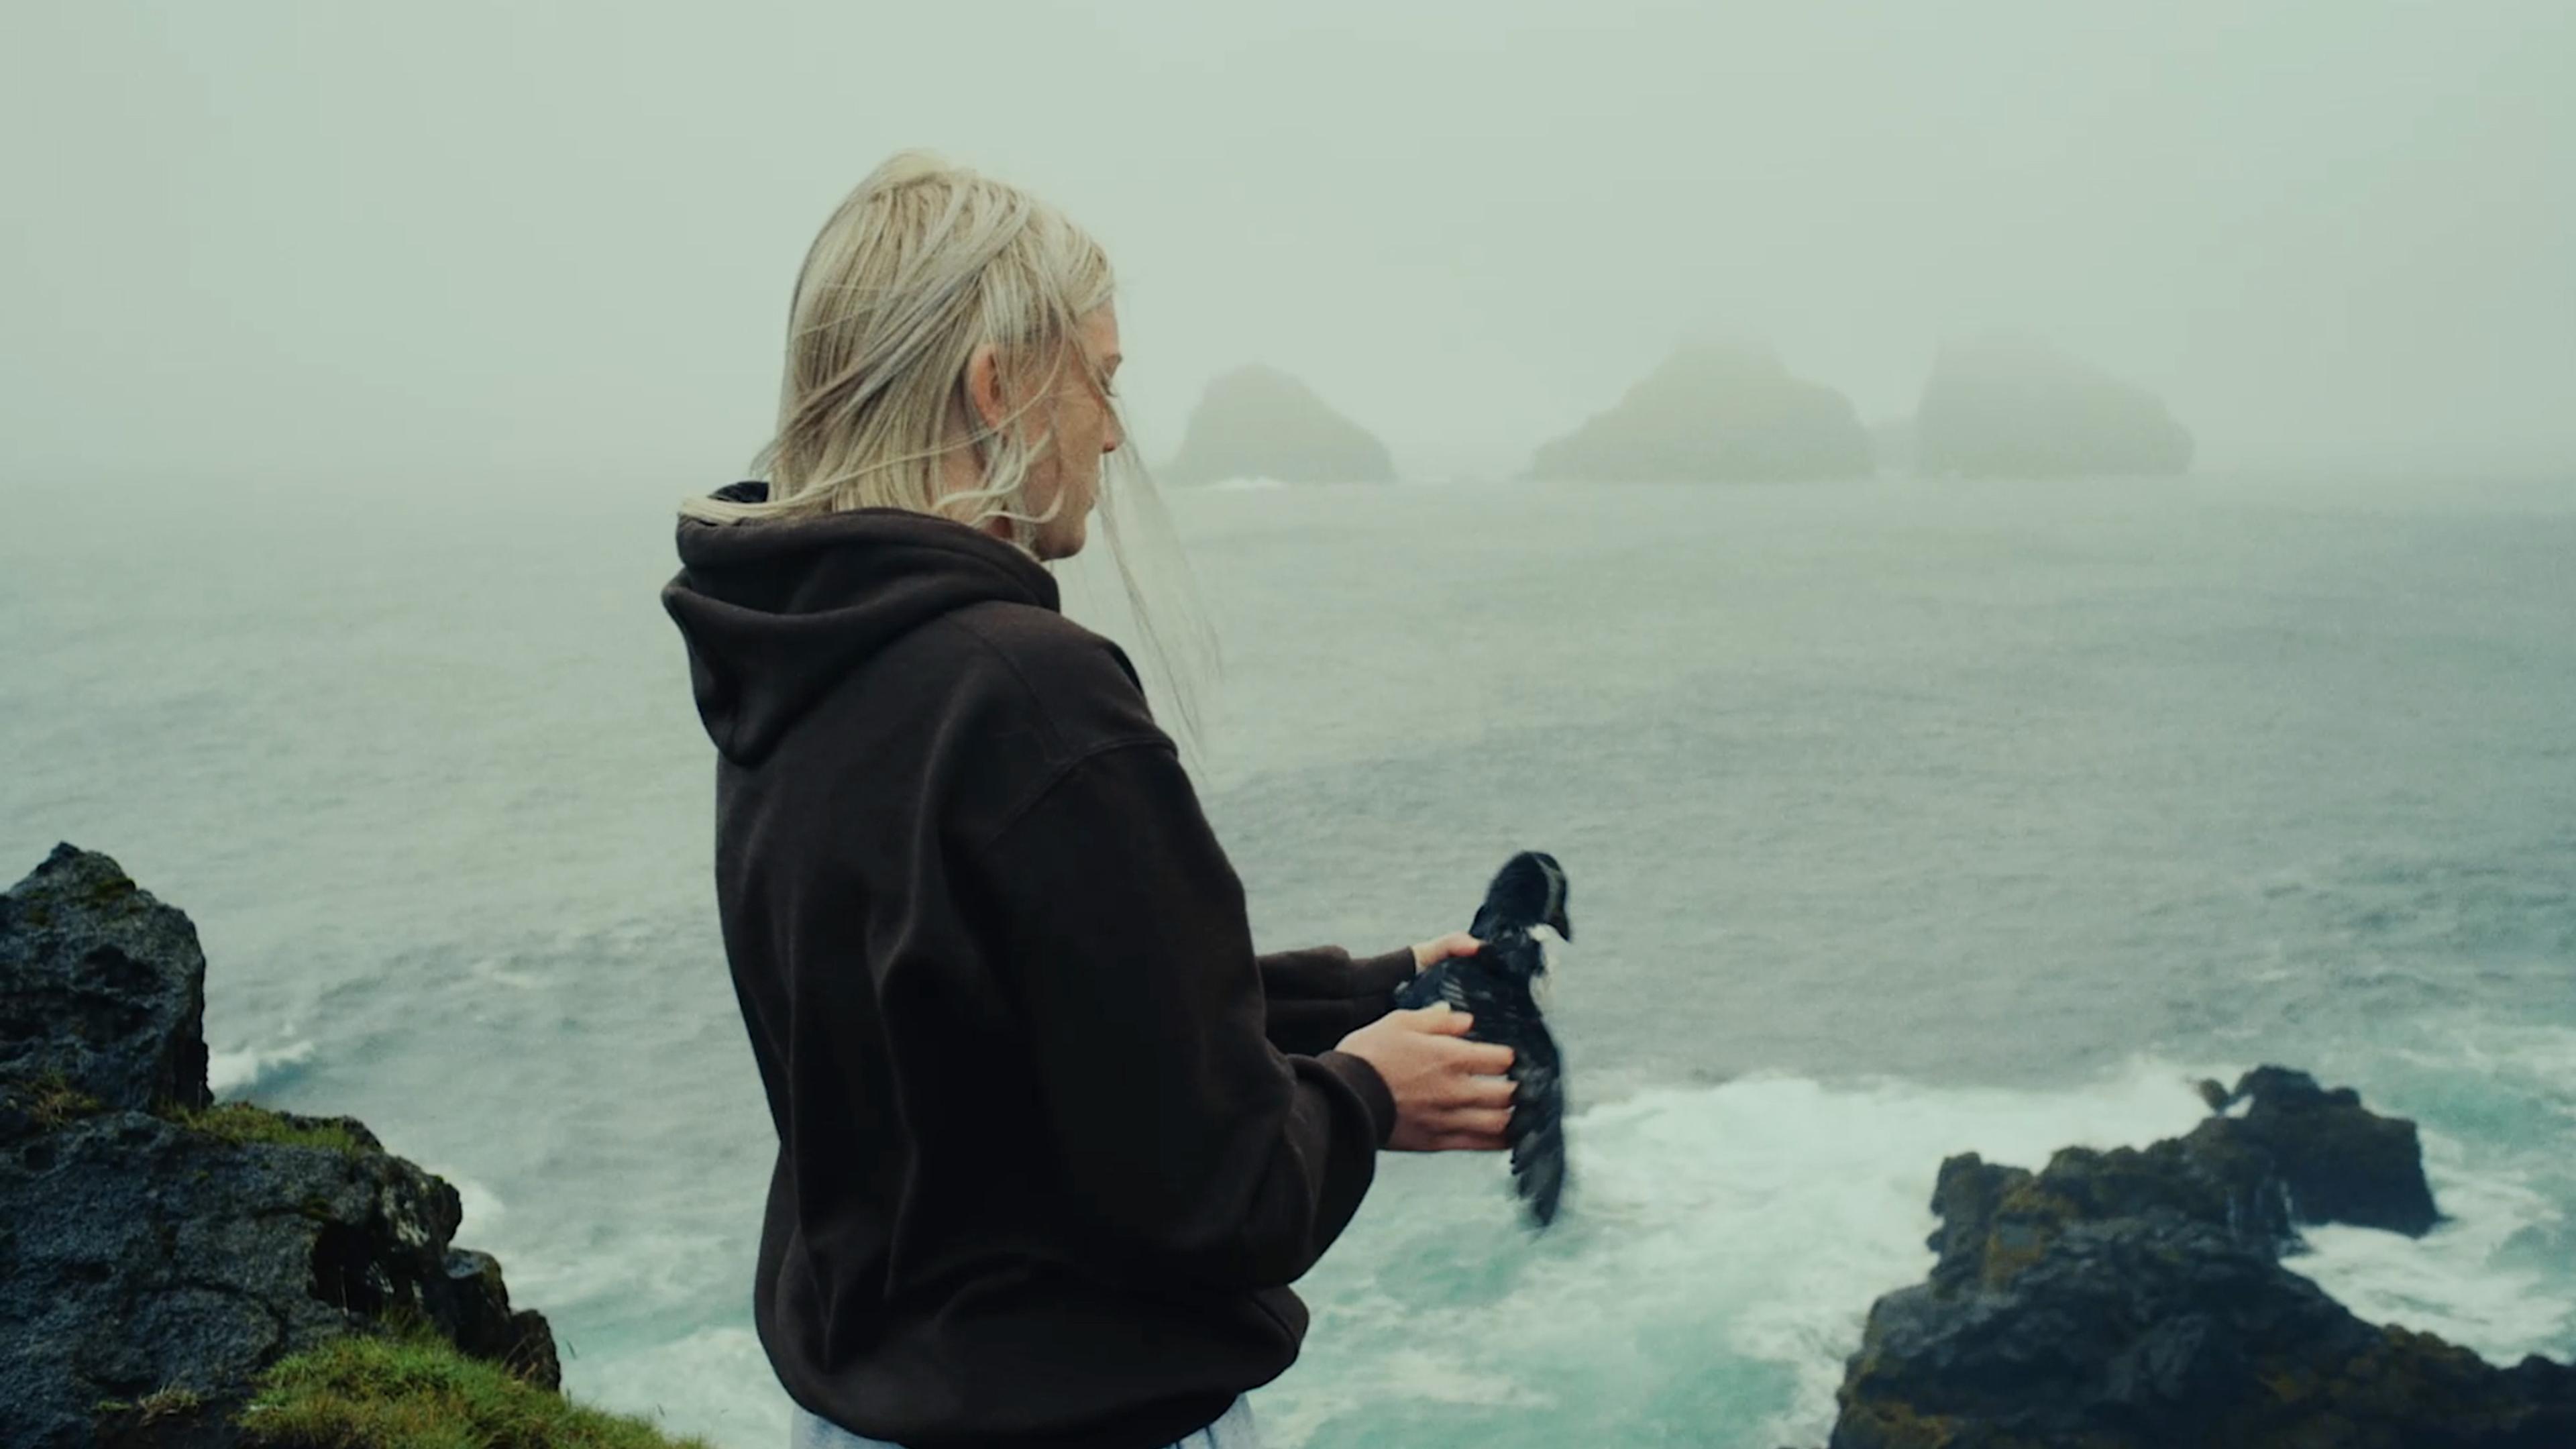 A person with light blonde hair, wearing a dark hoodie, stands on a cliff by the sea, holding a bird. The sea is rough with waves crashing against the rocks, and several rock formations are visible in the misty background.